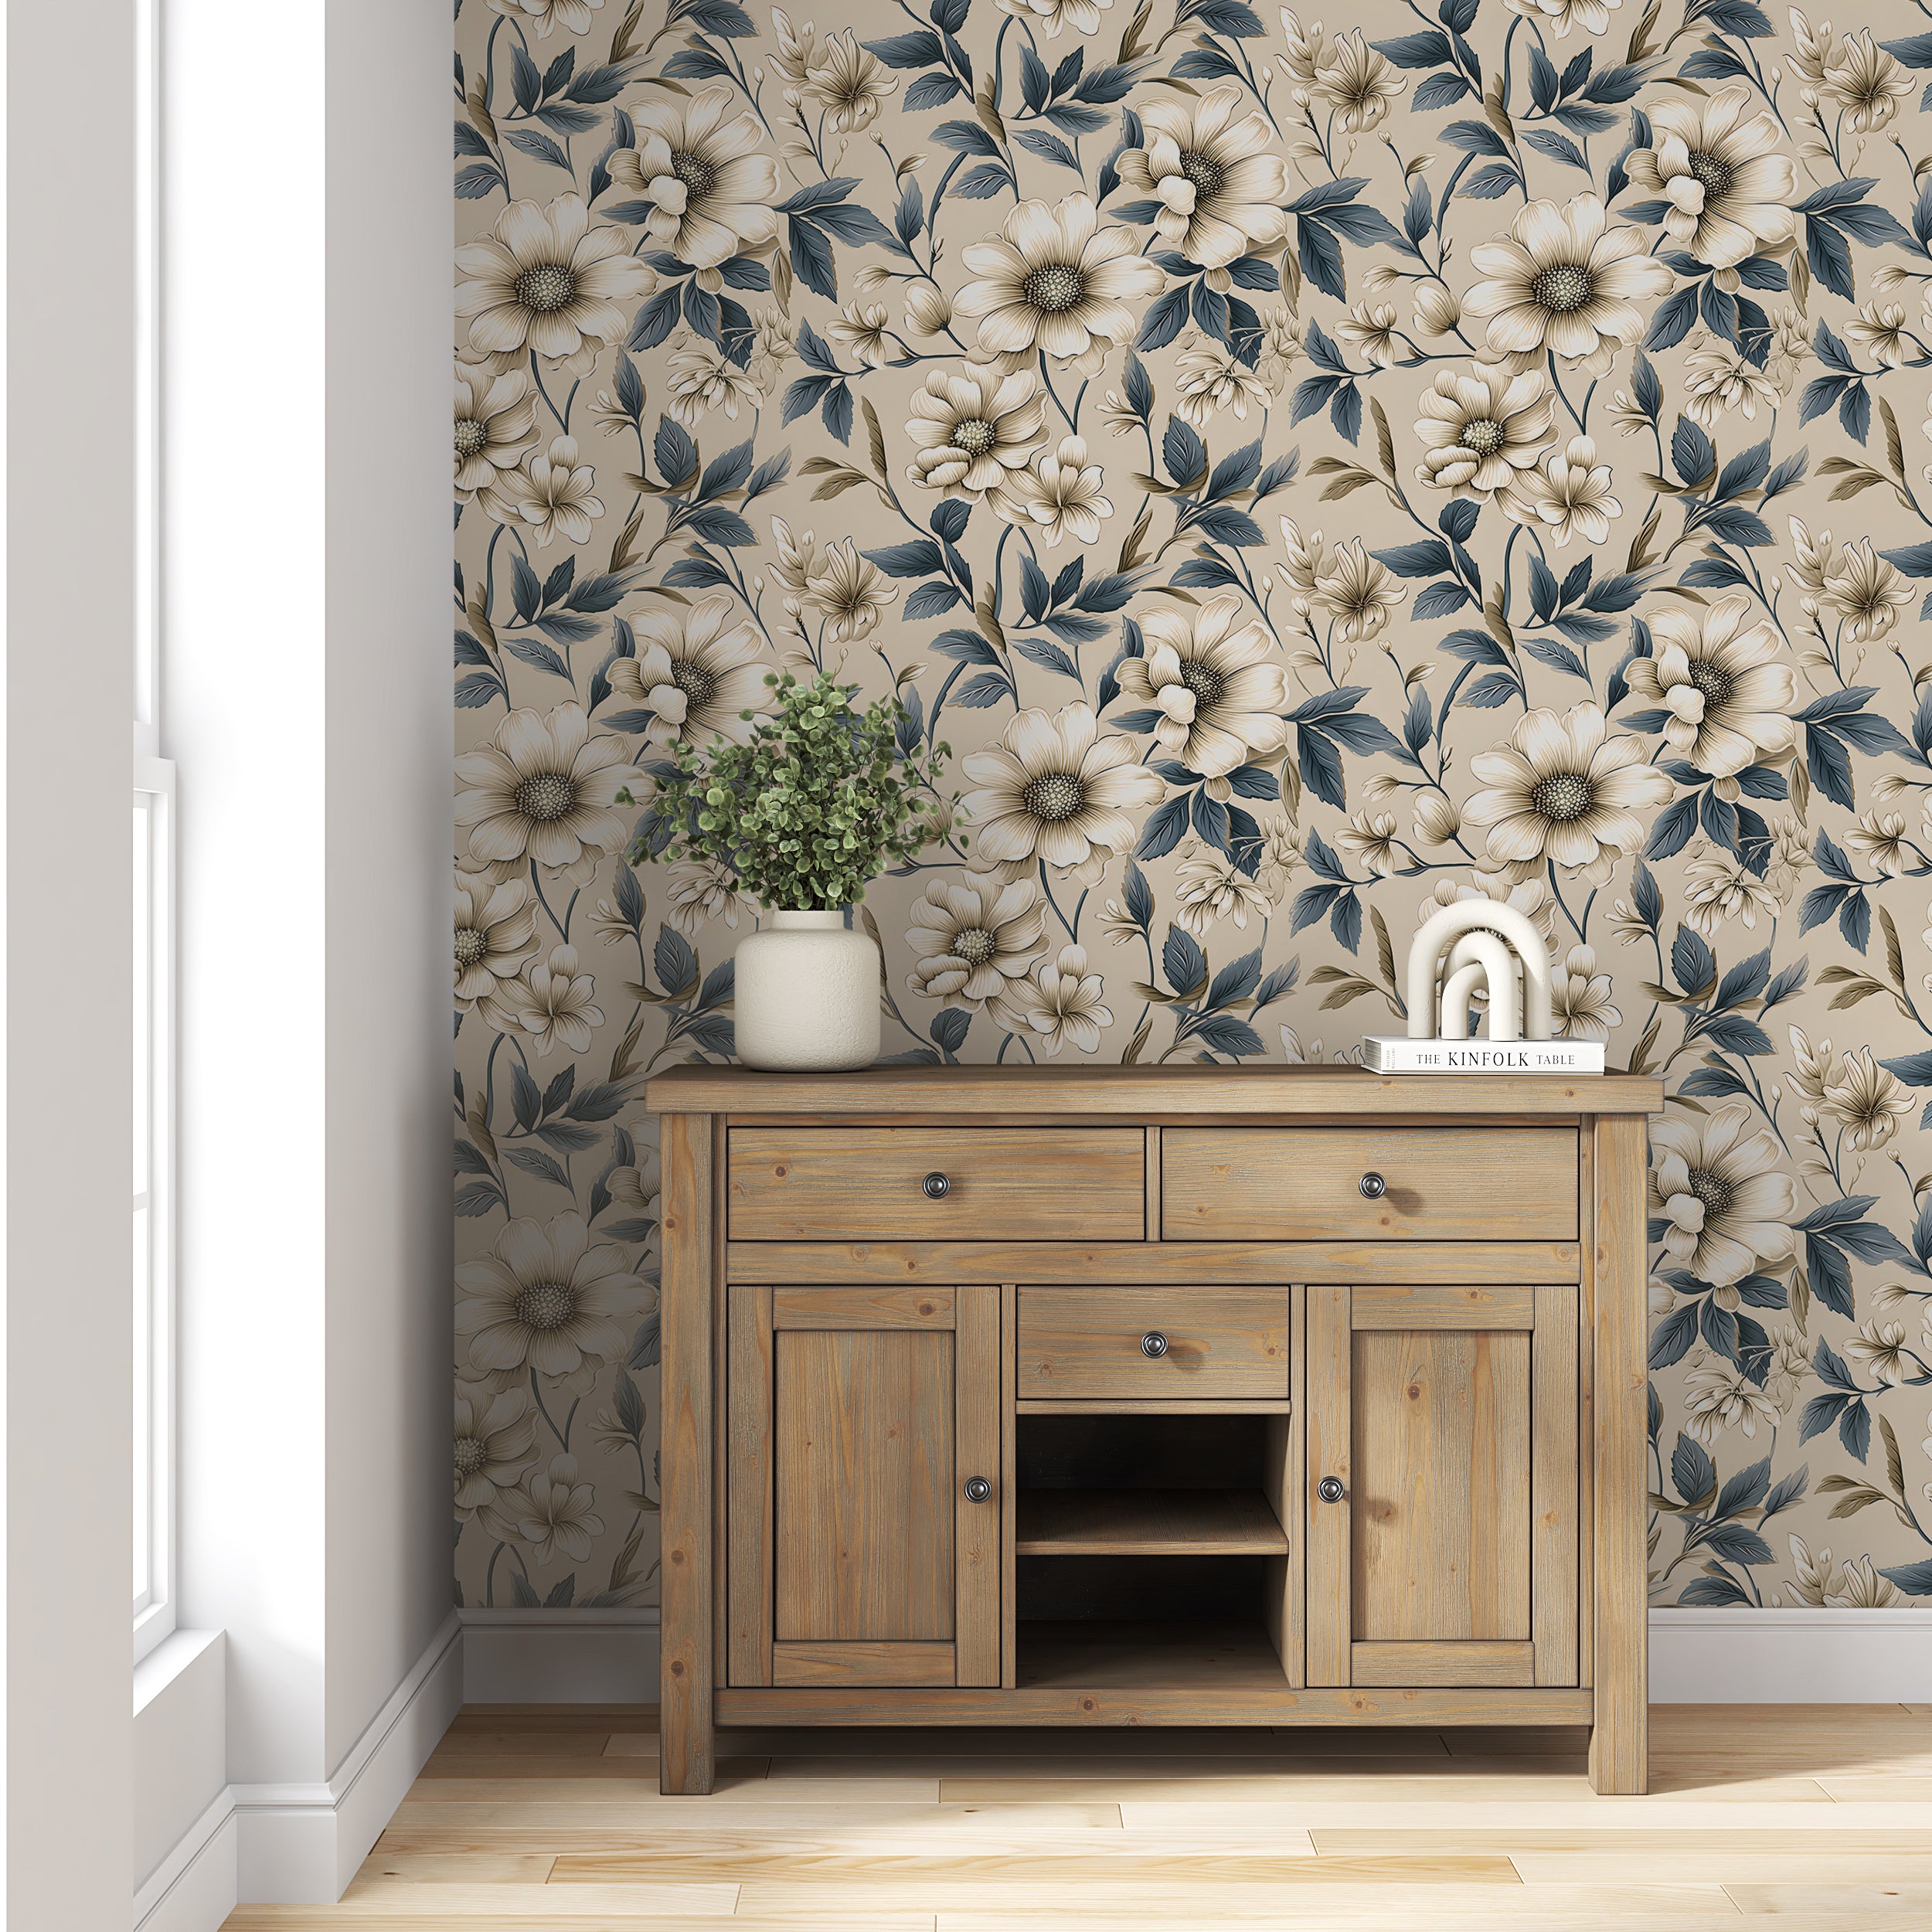 Botanical Wall Decal with Blue Flowers